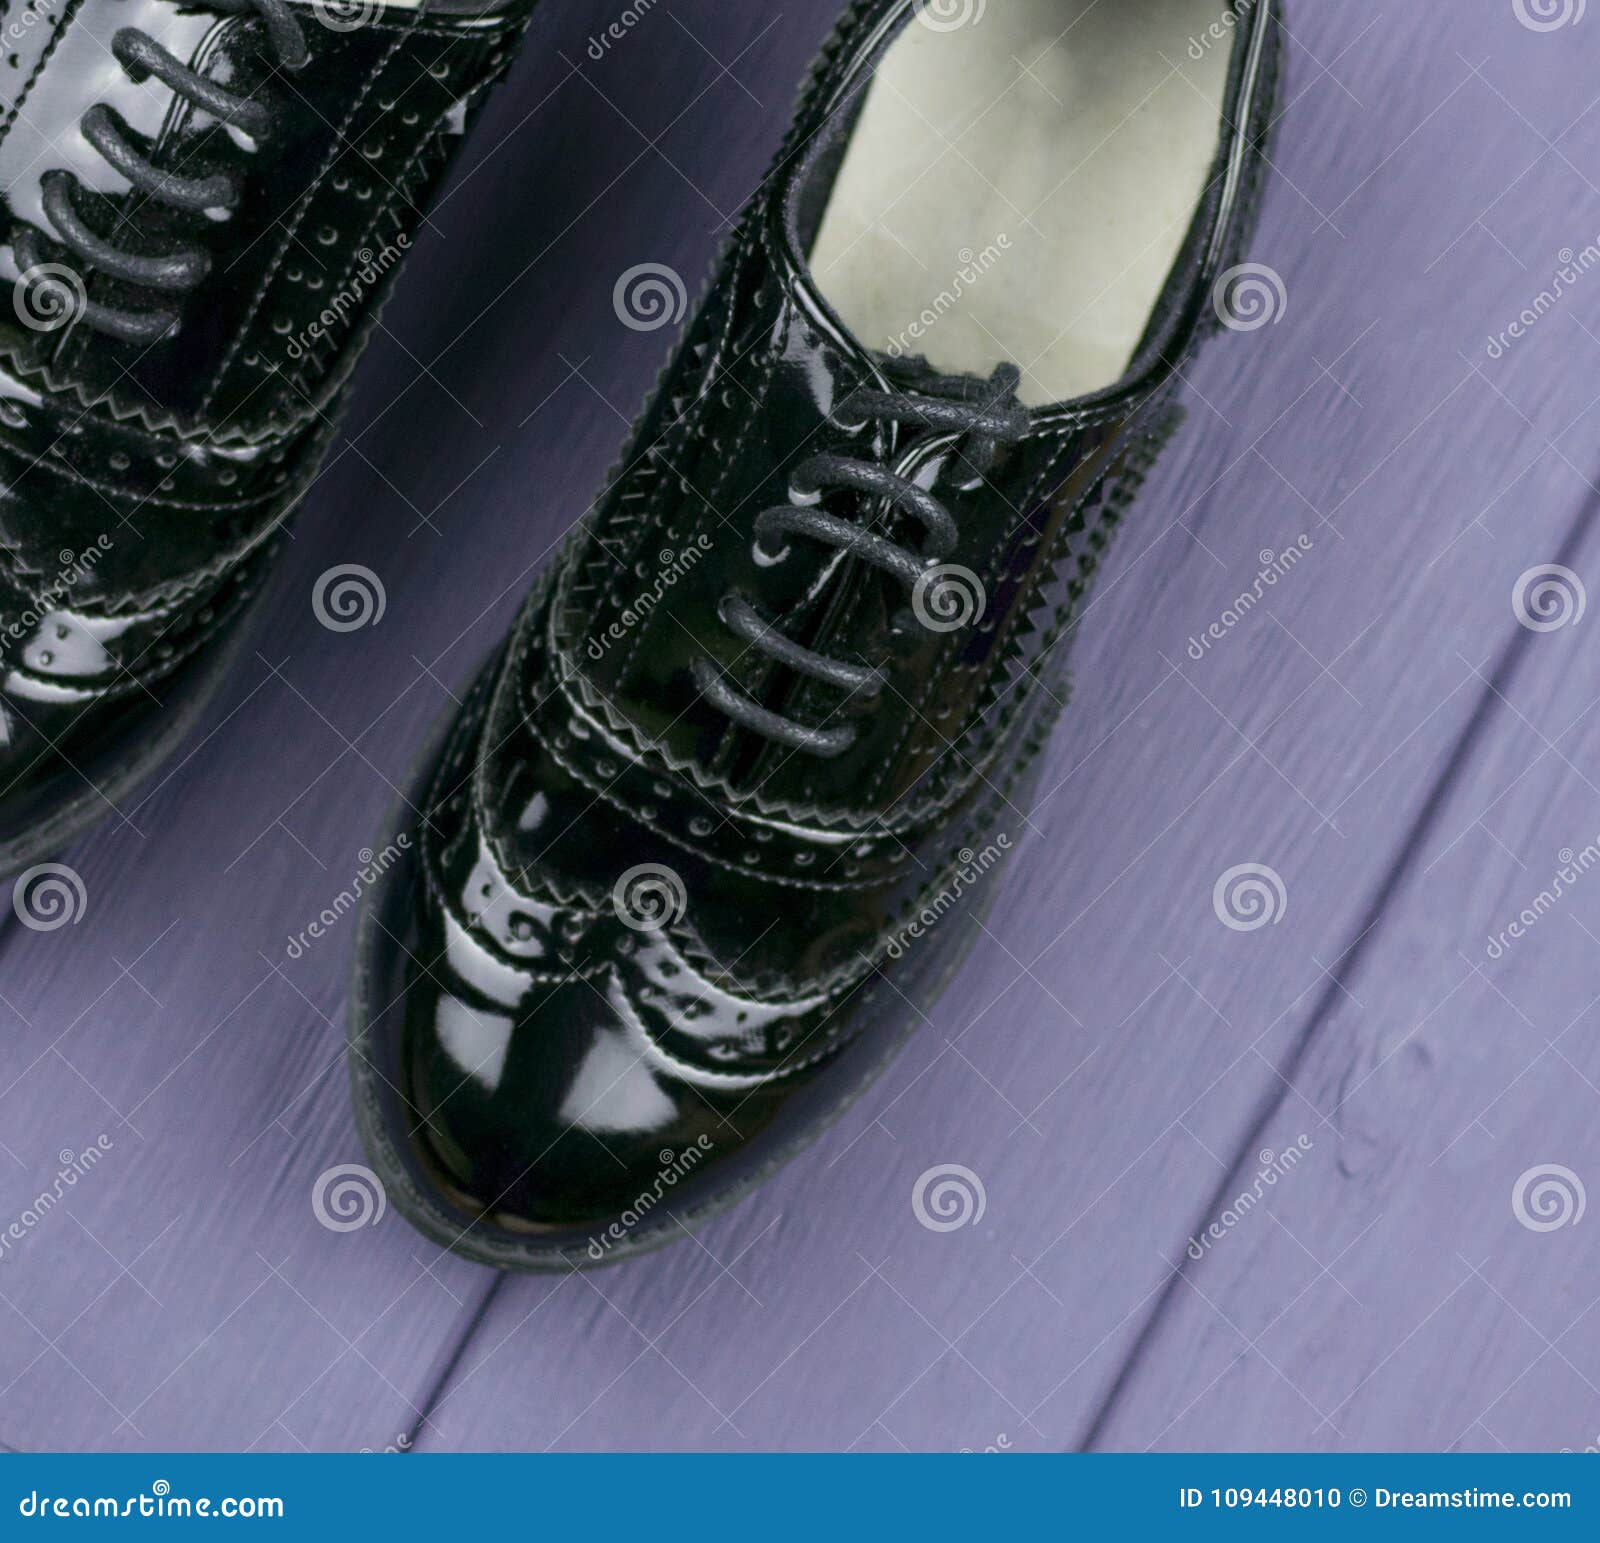 Patent leather black shoes stock photo. Image of footwear - 109448010